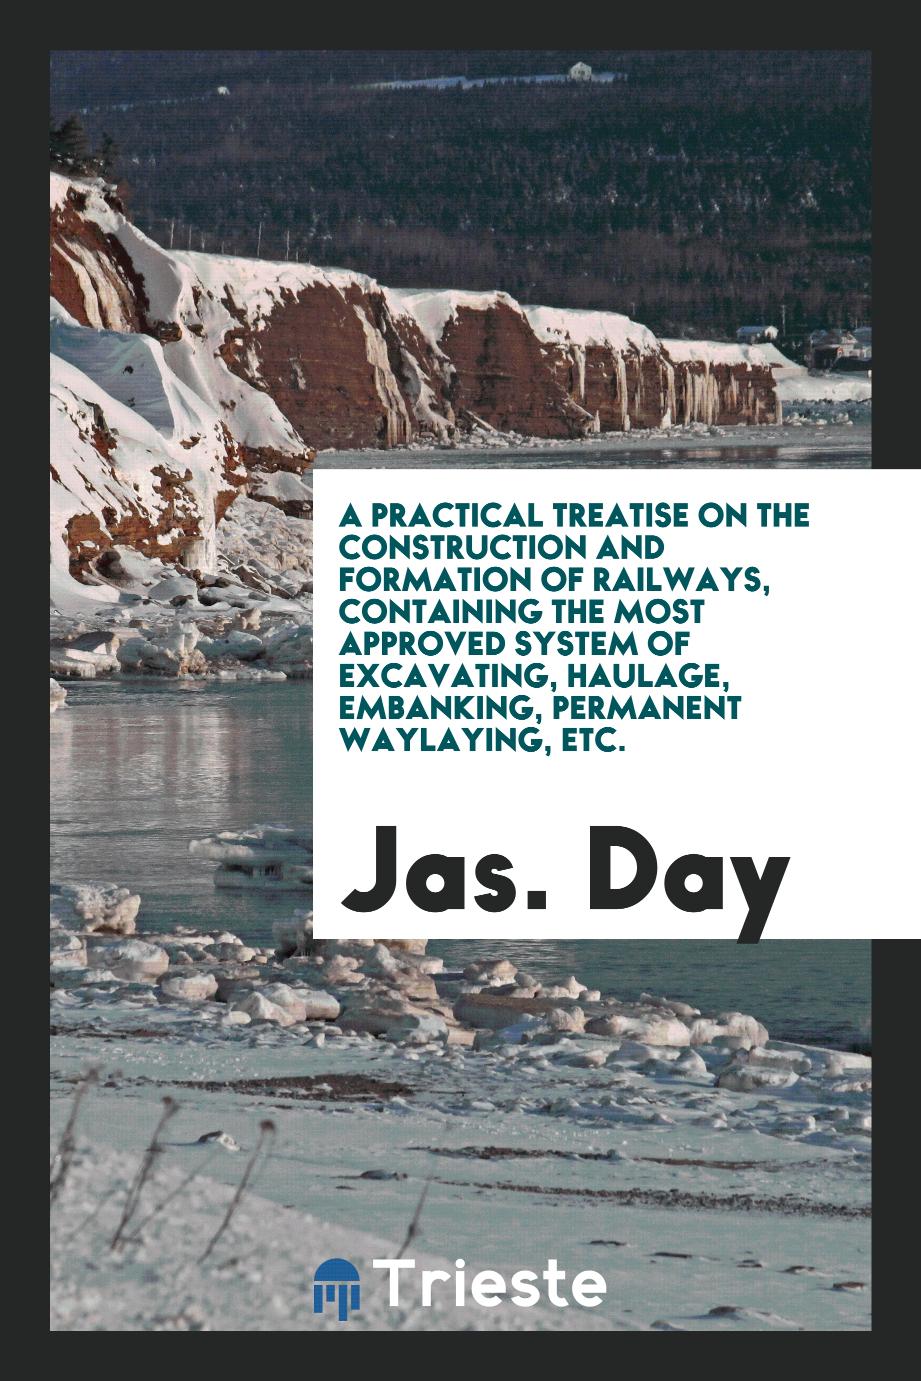 A Practical Treatise on the Construction and Formation of Railways, Containing the Most Approved System of Excavating, Haulage, Embanking, Permanent Waylaying, etc.